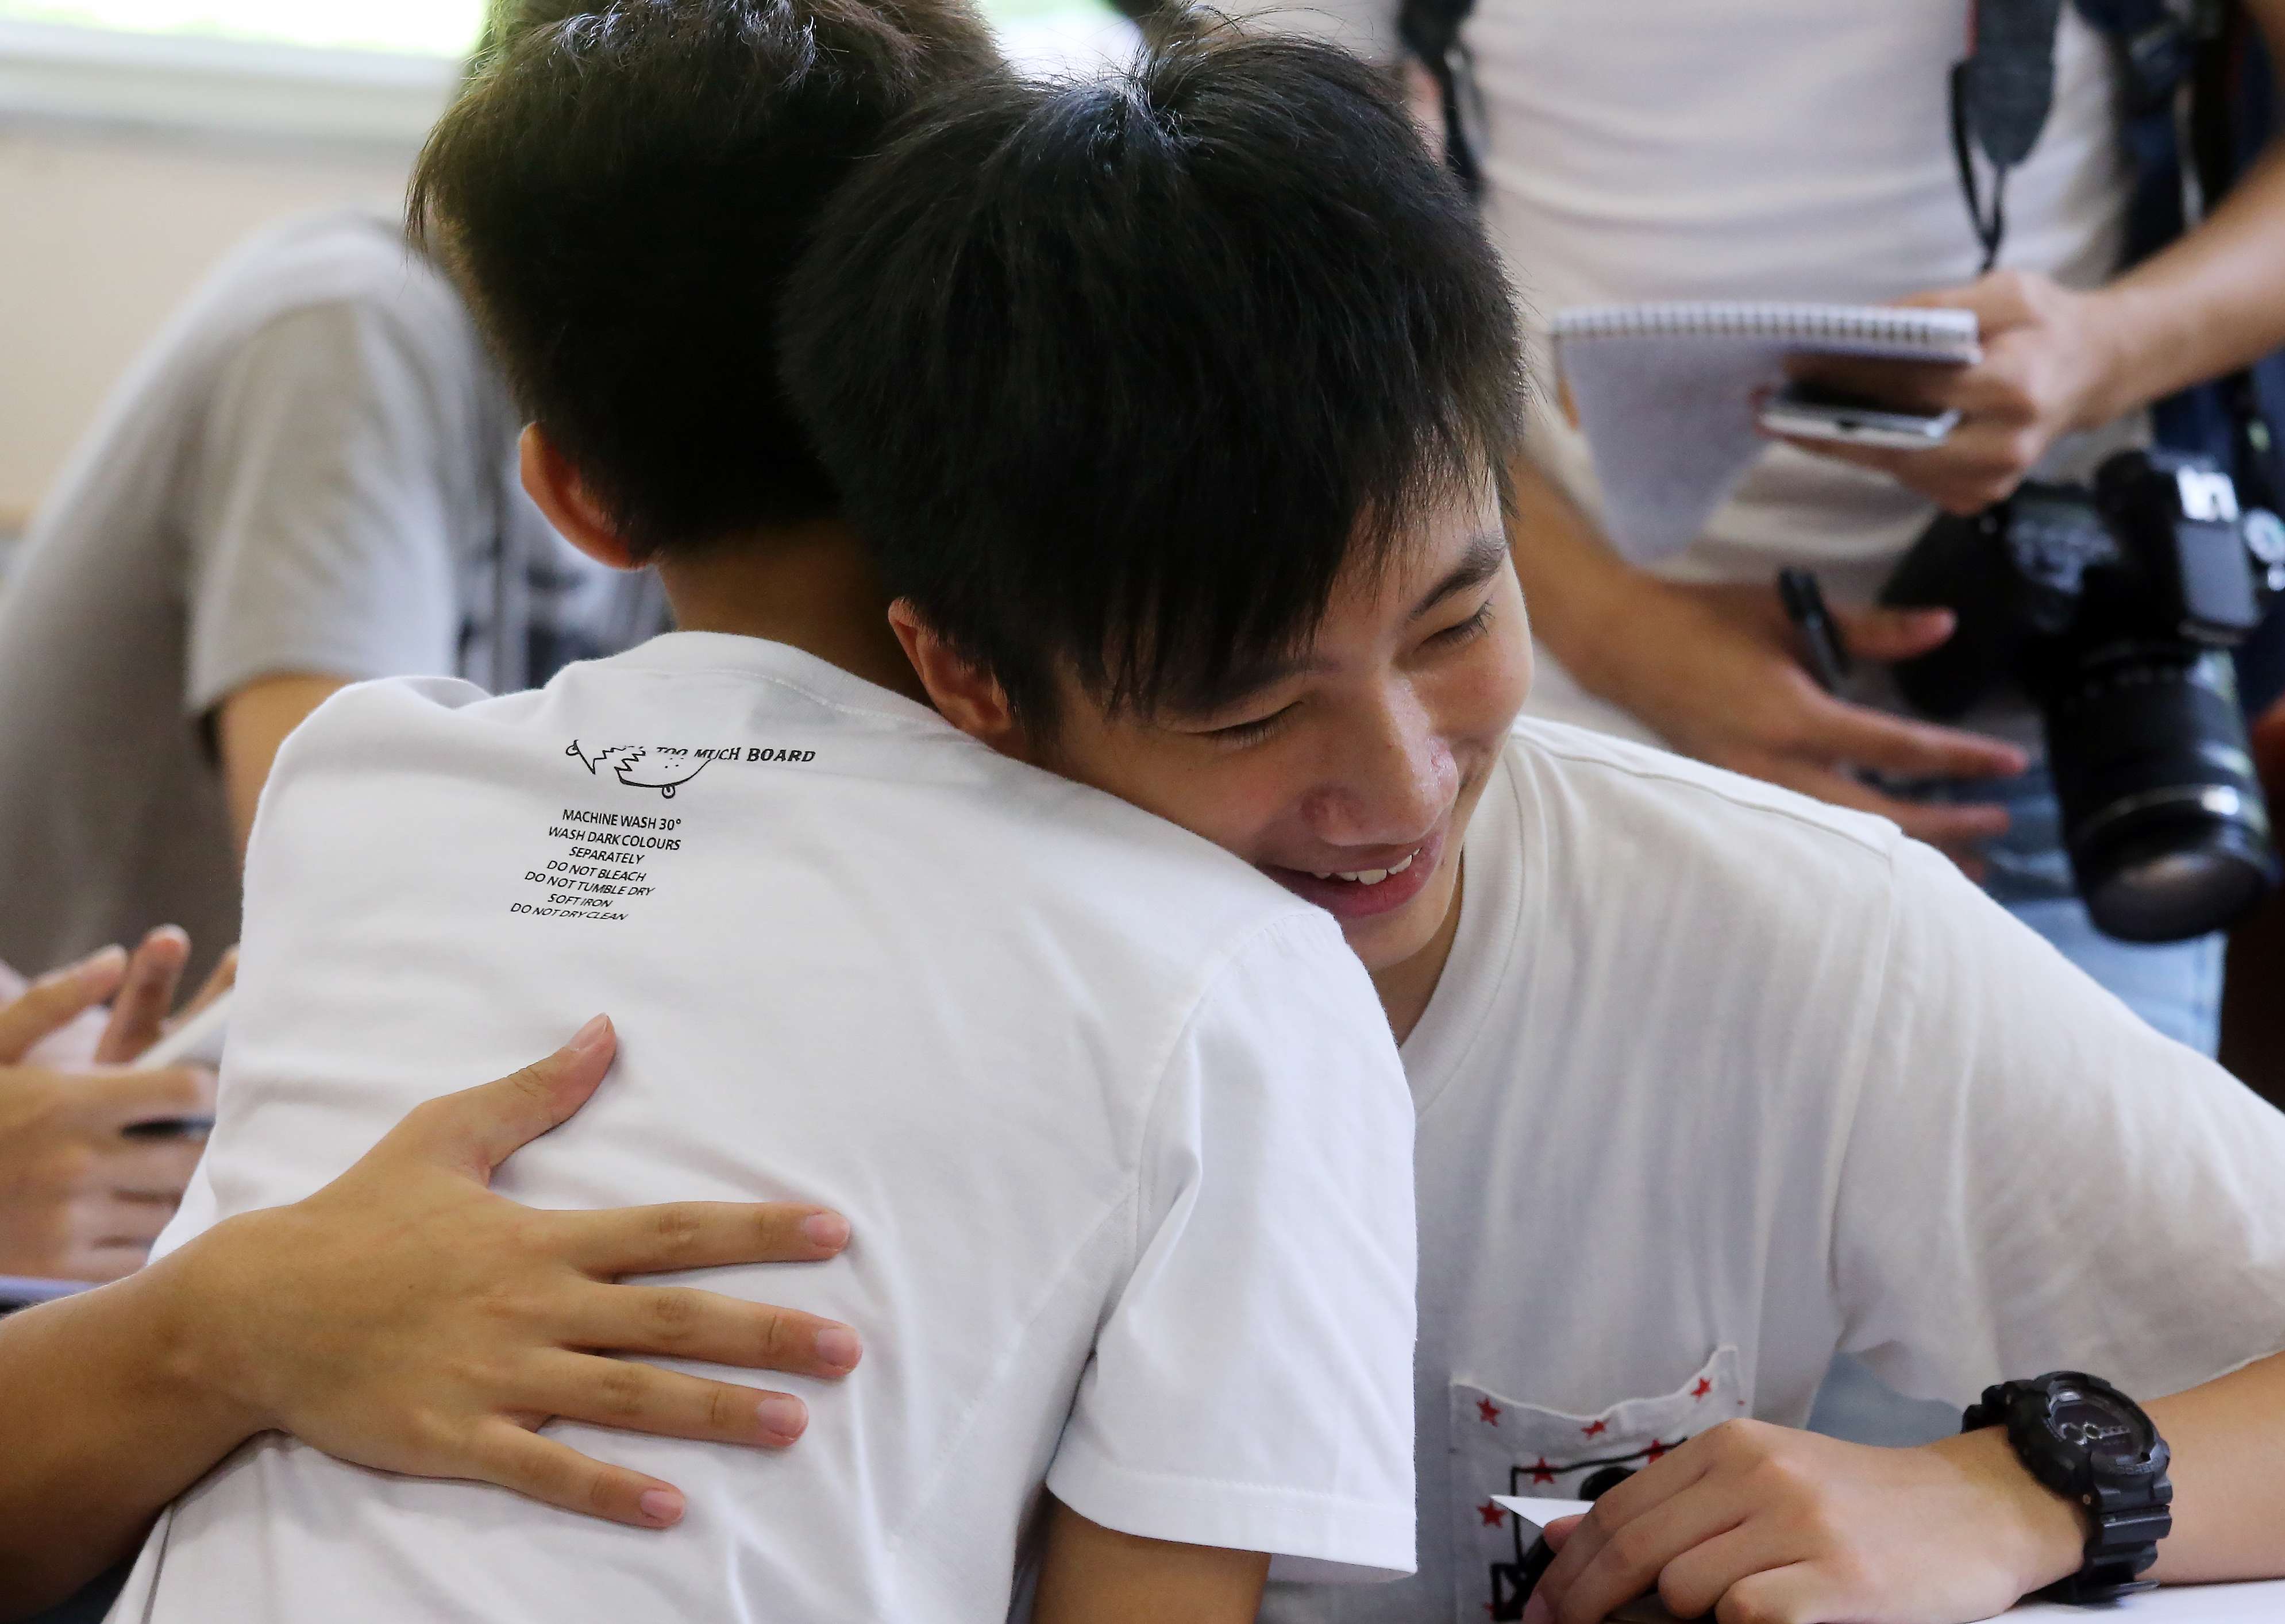 Hong Kong secondary school students congratulate each other after collecting their exam results. School pressure isn’t the most cited reason for student suicides, according to one study. Photo: Dickson Lee